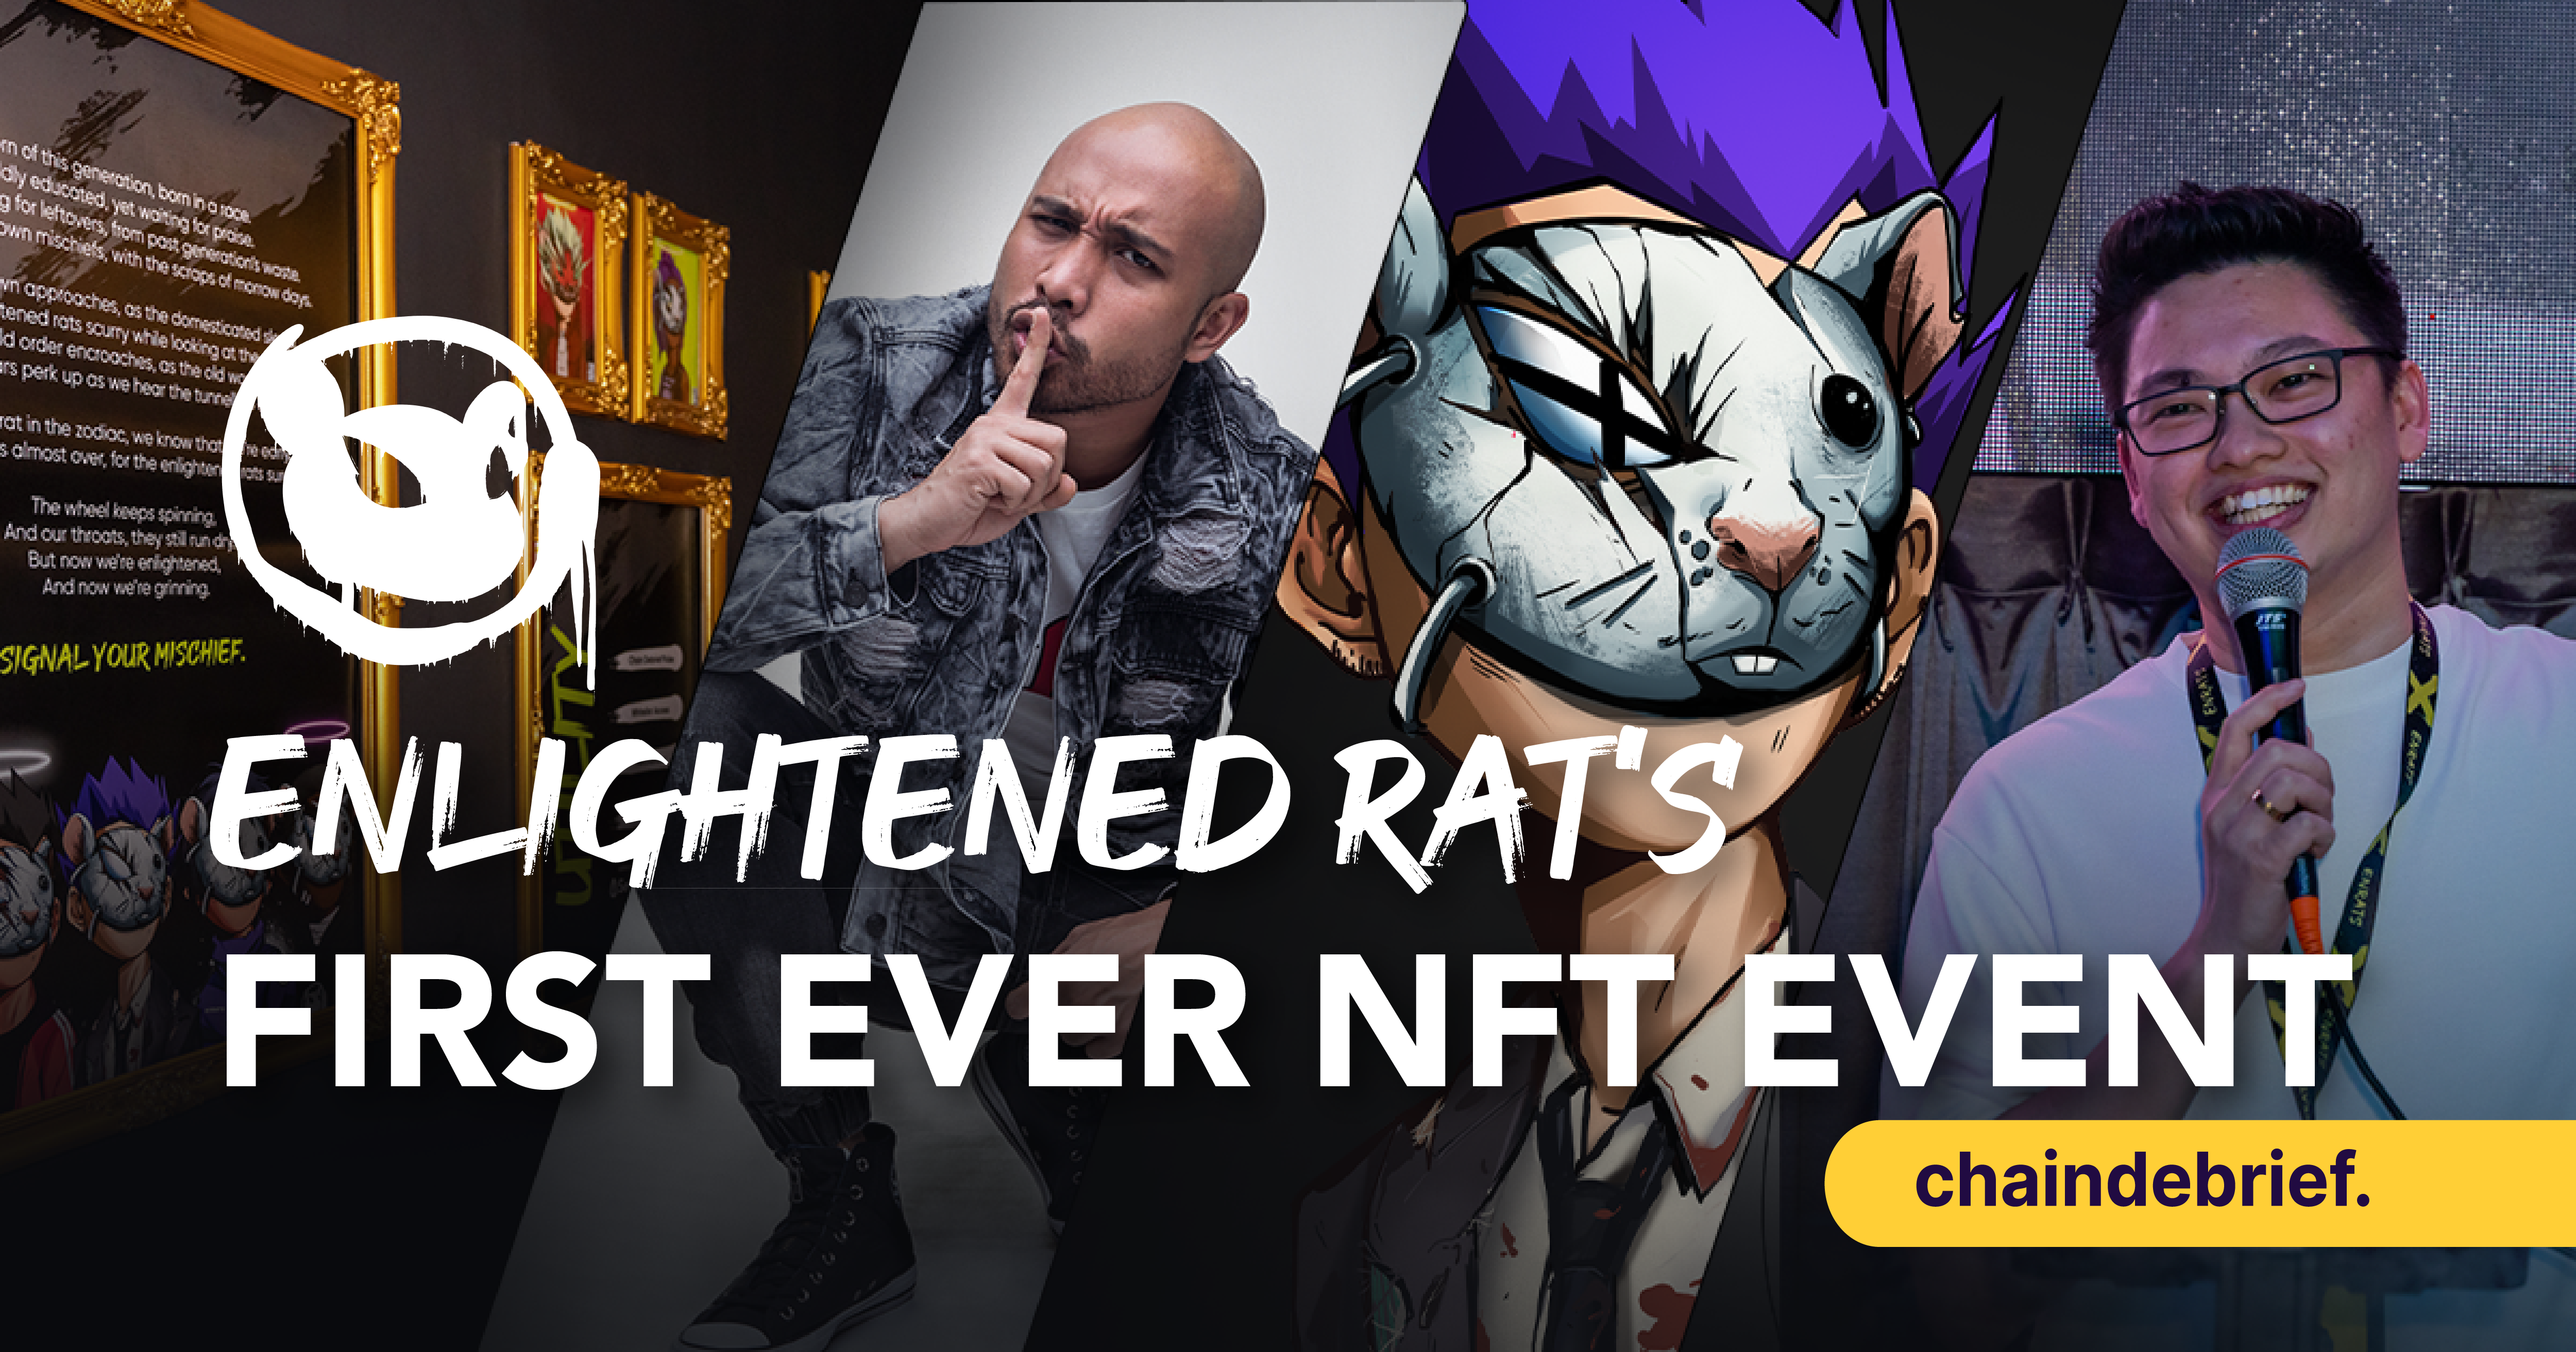 More Than Just A JPEG: Enlightened Rat’s First Exclusive Community Event